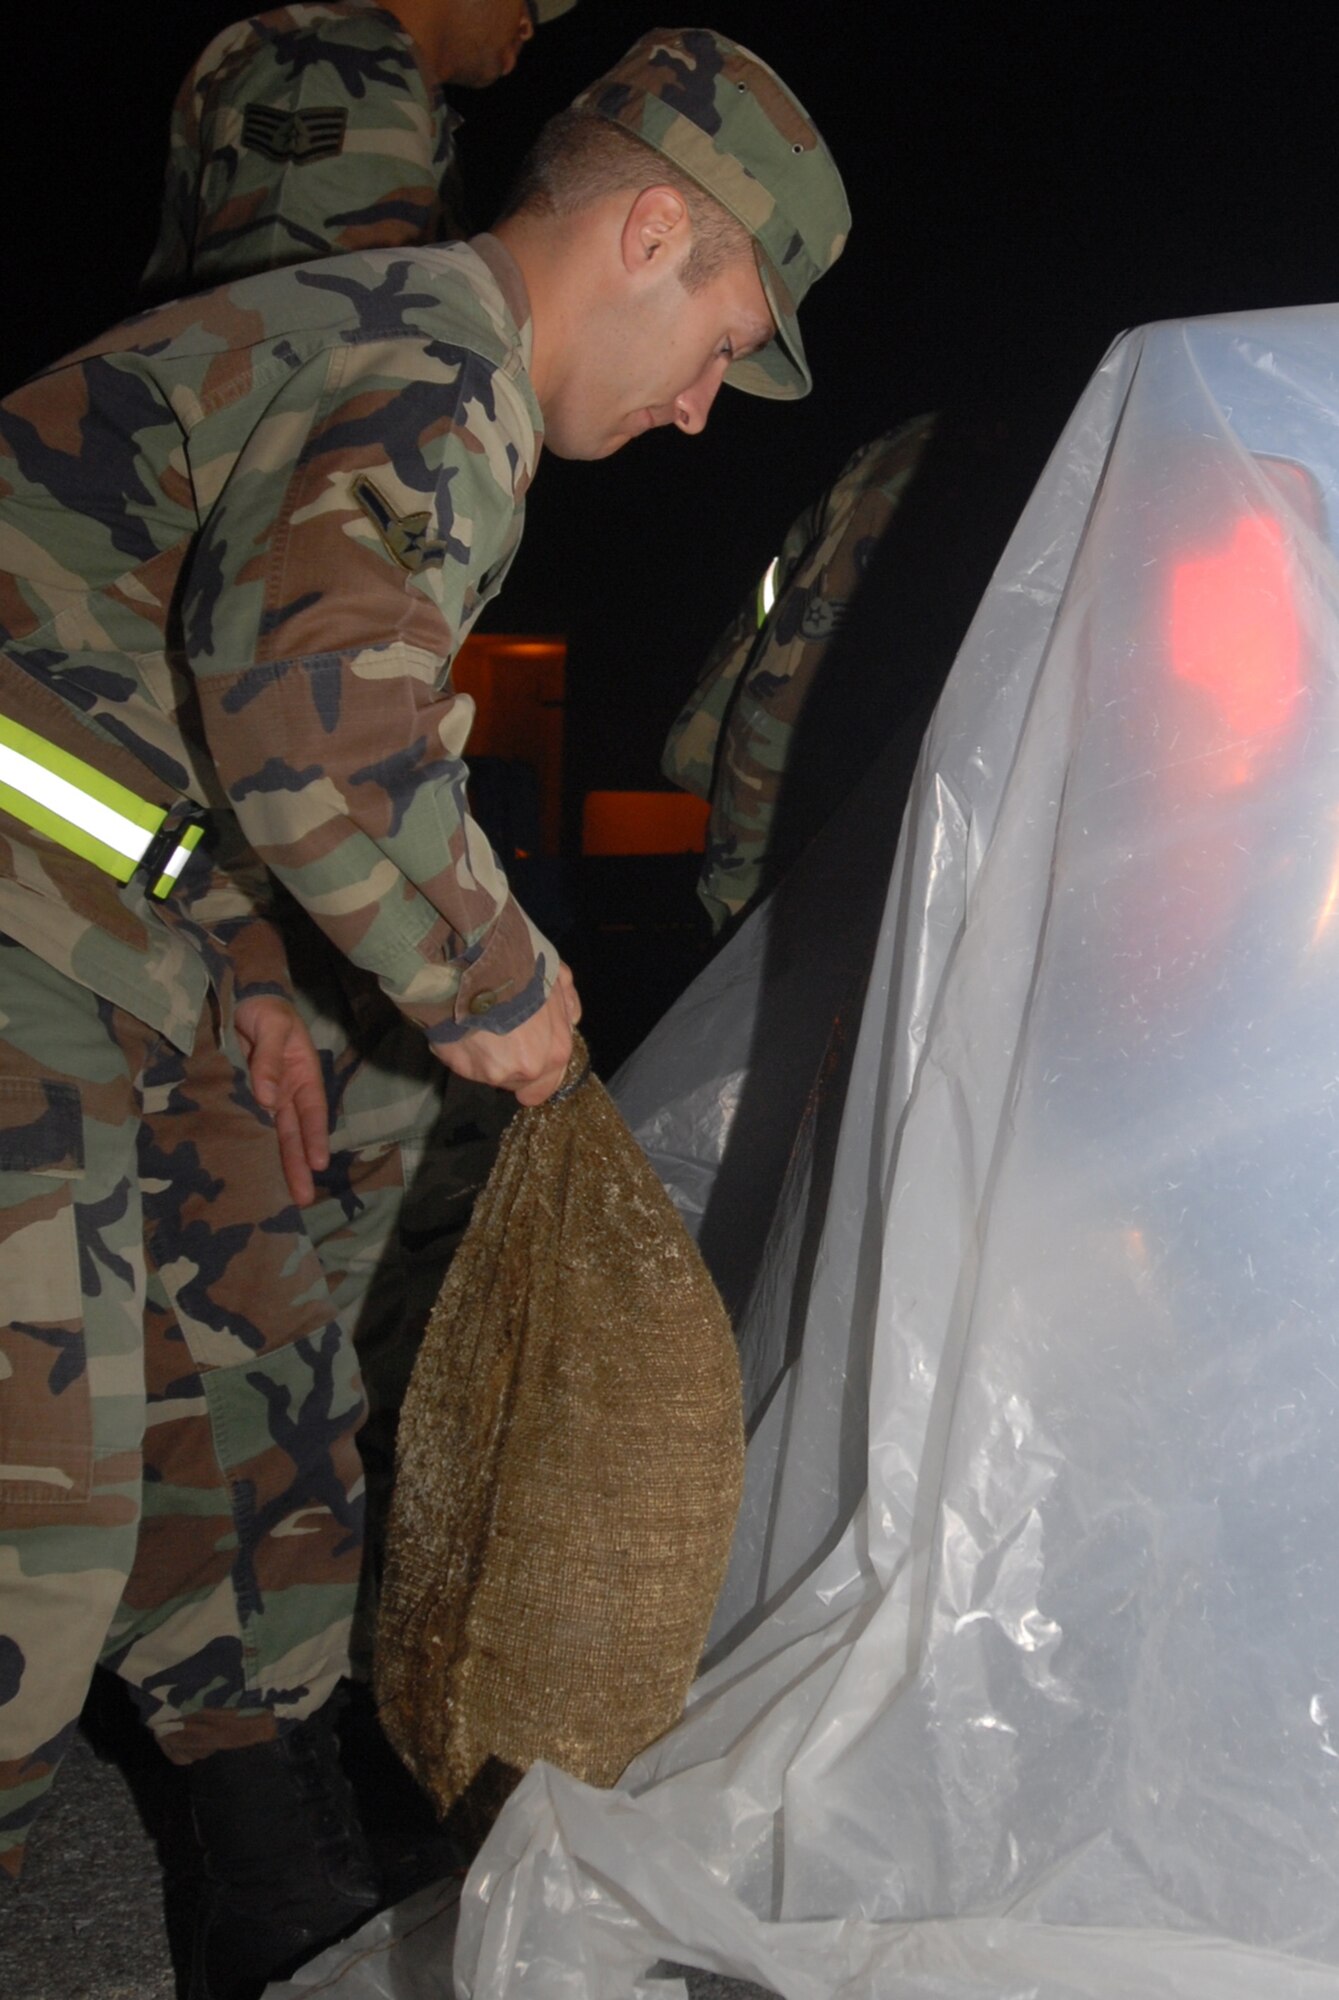 Airmen from the 18th Logistics Readiness Squadron, Vehicle Operations Section secure plastic around a pick-up truck with sandbags in preparation for a simulated chemical attack during Local Operational Readiness Exercise Beverly High 08-2 at Kadena Air Base, Japan, Dec. 3, 2007. These scenarios enable base agencies to work together, mitigate real-world situations, and heighten readiness capabilities.
(U.S. Air Force photo/Staff Sgt. Chrissy FitzGerald)
